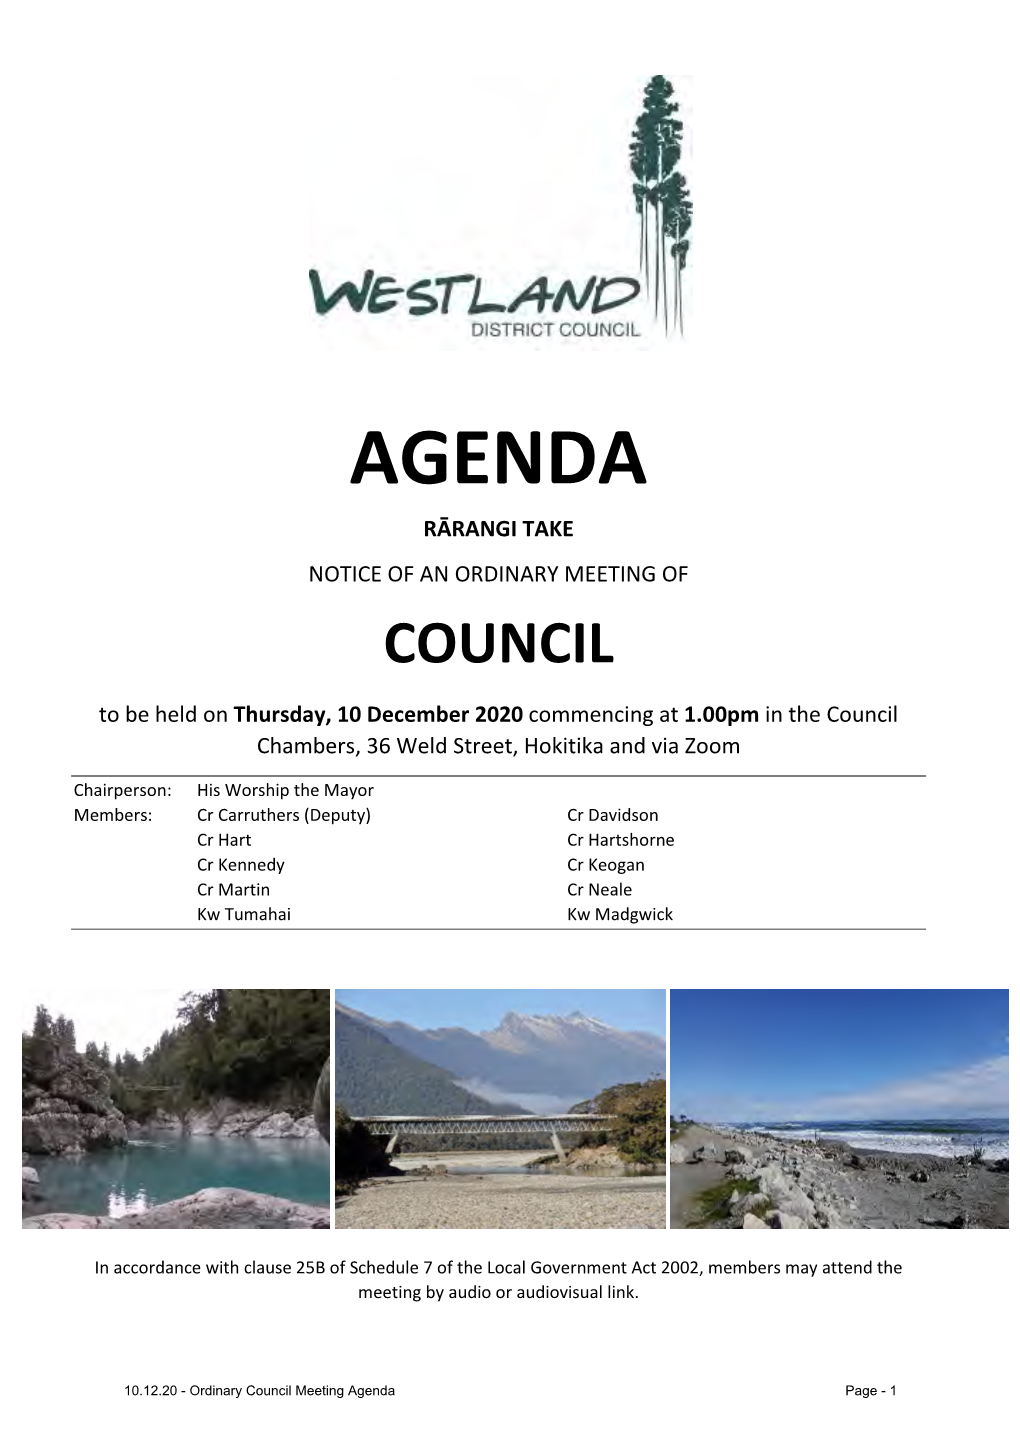 Council Meeting Agenda Page - 1 Council Vision